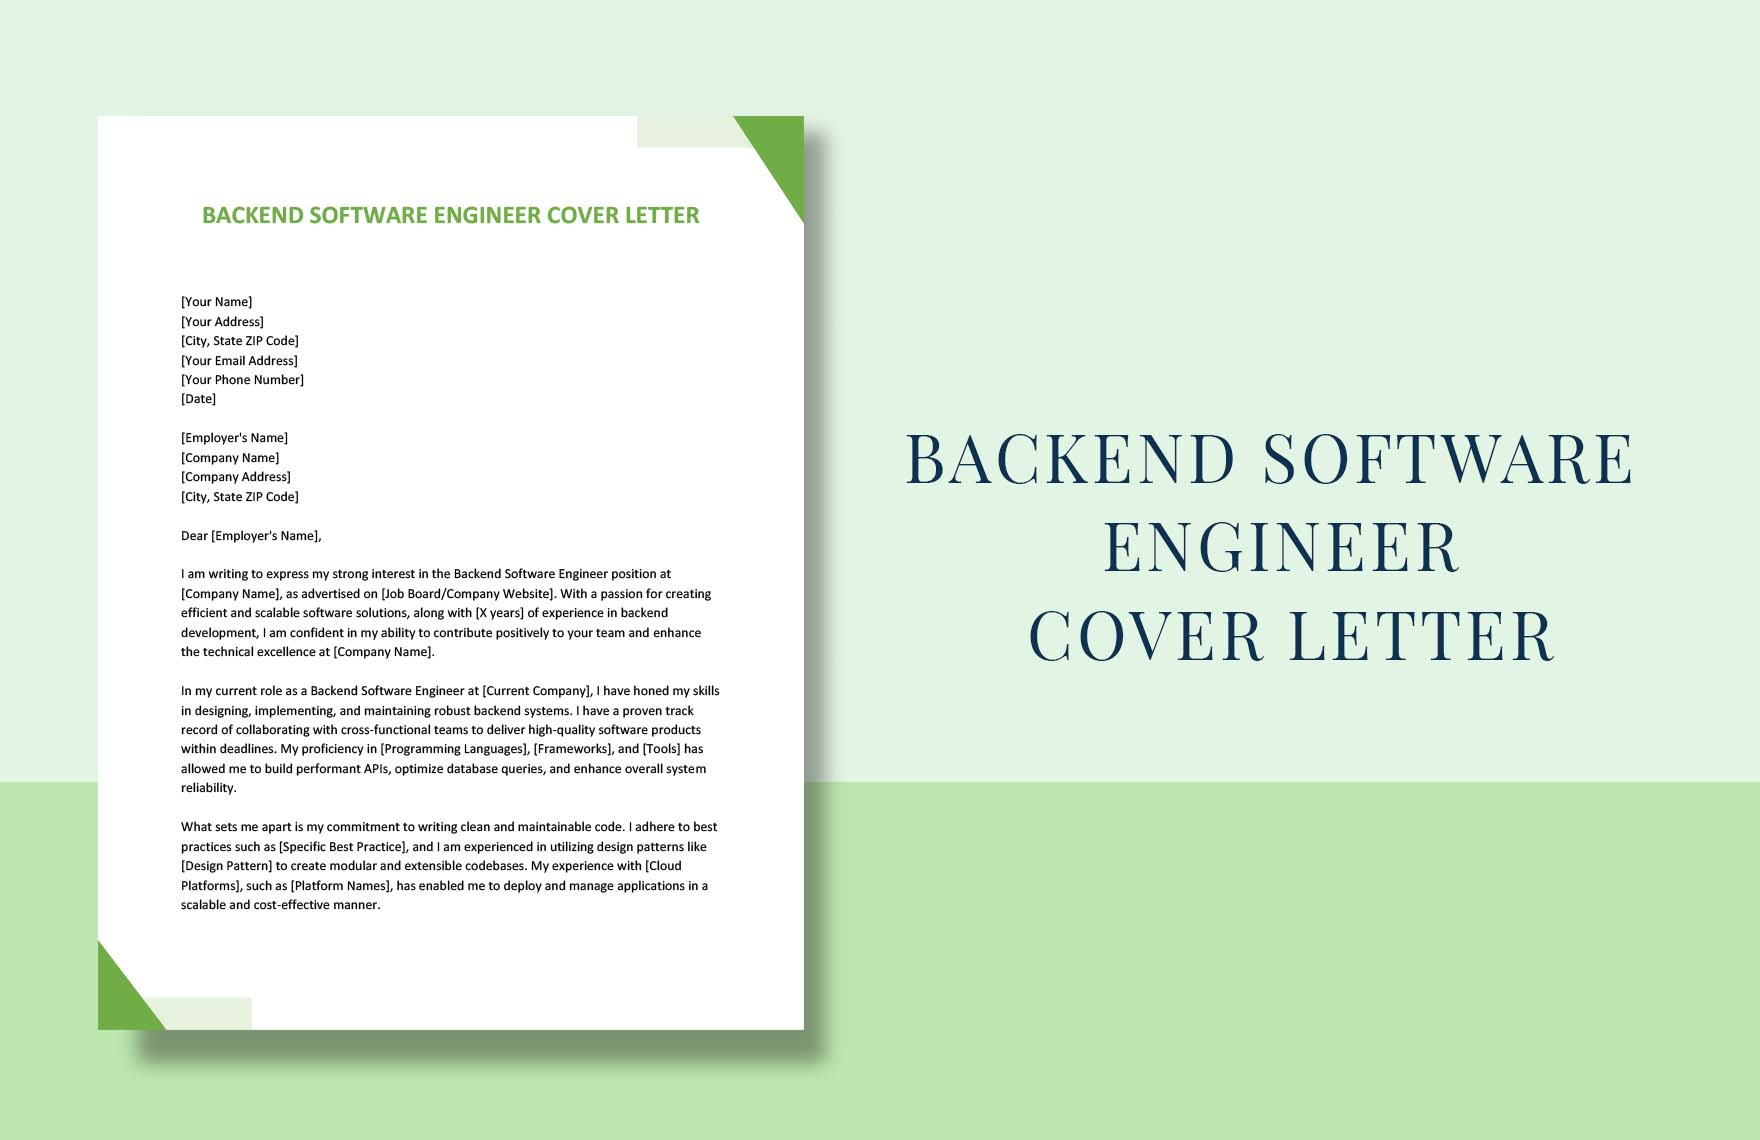 Backend Software Engineer Cover Letter in Word, Google Docs